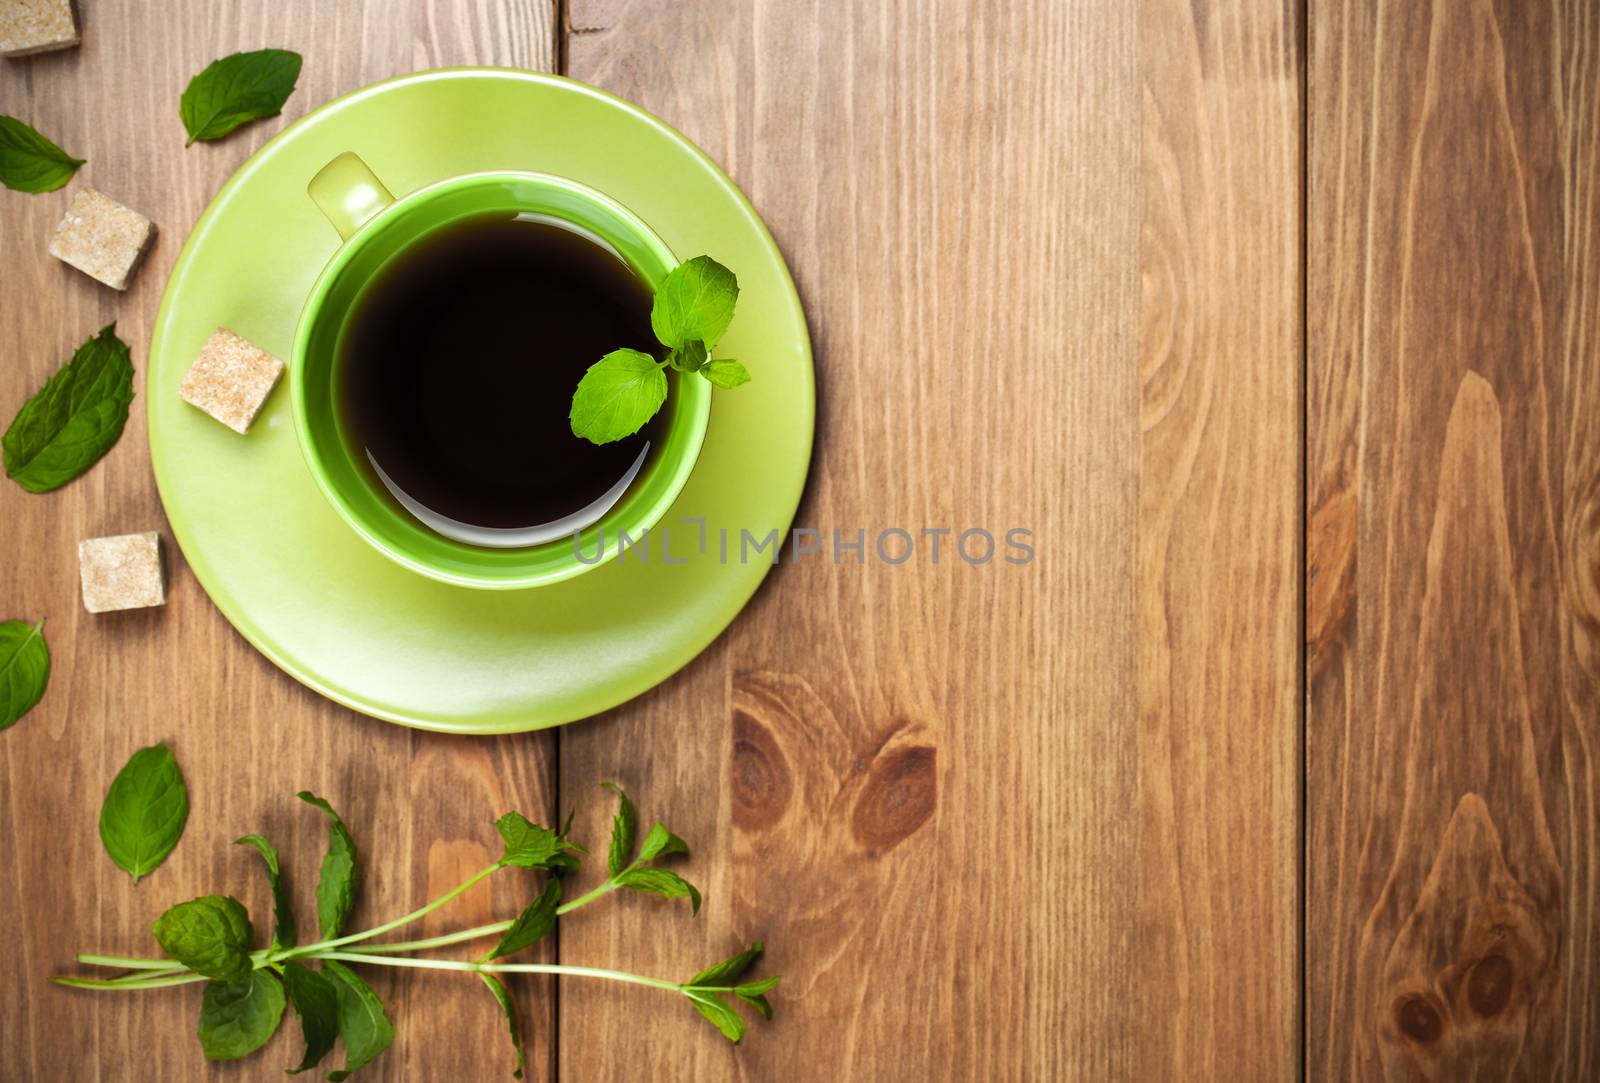 Tea mint in green cup with mint leaves and brown sugar on wooden background. Top view. Copy space. Focus on tea
